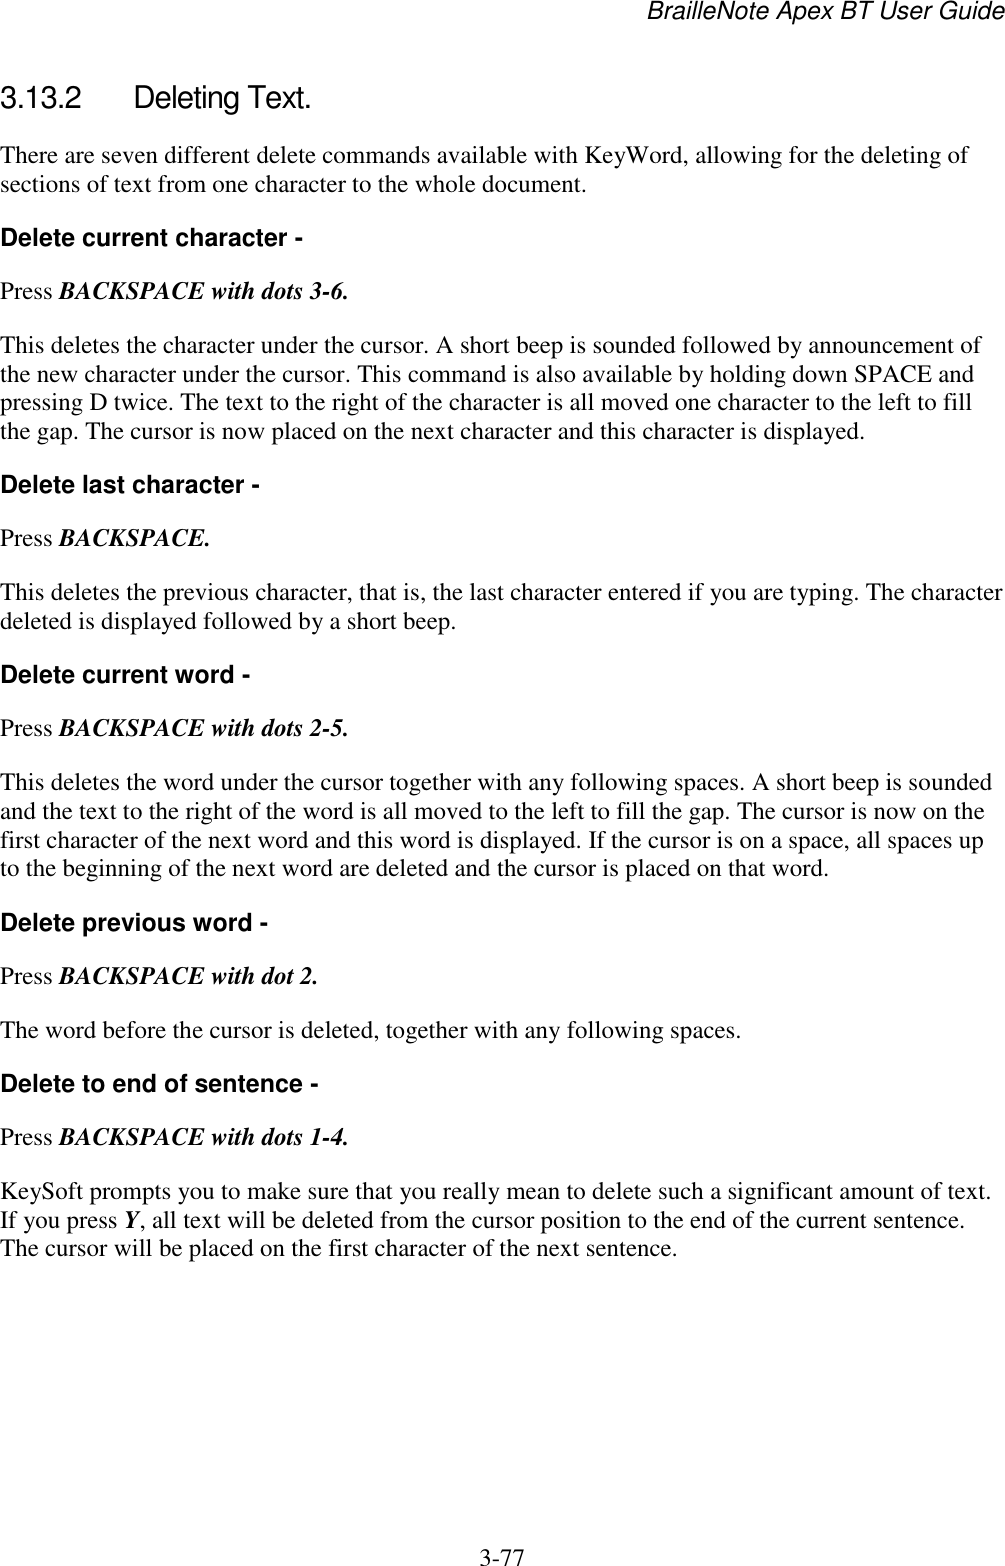 BrailleNote Apex BT User Guide   3-77   3.13.2  Deleting Text. There are seven different delete commands available with KeyWord, allowing for the deleting of sections of text from one character to the whole document. Delete current character - Press BACKSPACE with dots 3-6. This deletes the character under the cursor. A short beep is sounded followed by announcement of the new character under the cursor. This command is also available by holding down SPACE and pressing D twice. The text to the right of the character is all moved one character to the left to fill the gap. The cursor is now placed on the next character and this character is displayed. Delete last character - Press BACKSPACE. This deletes the previous character, that is, the last character entered if you are typing. The character deleted is displayed followed by a short beep.  Delete current word - Press BACKSPACE with dots 2-5. This deletes the word under the cursor together with any following spaces. A short beep is sounded and the text to the right of the word is all moved to the left to fill the gap. The cursor is now on the first character of the next word and this word is displayed. If the cursor is on a space, all spaces up to the beginning of the next word are deleted and the cursor is placed on that word. Delete previous word - Press BACKSPACE with dot 2. The word before the cursor is deleted, together with any following spaces. Delete to end of sentence - Press BACKSPACE with dots 1-4. KeySoft prompts you to make sure that you really mean to delete such a significant amount of text. If you press Y, all text will be deleted from the cursor position to the end of the current sentence. The cursor will be placed on the first character of the next sentence.  